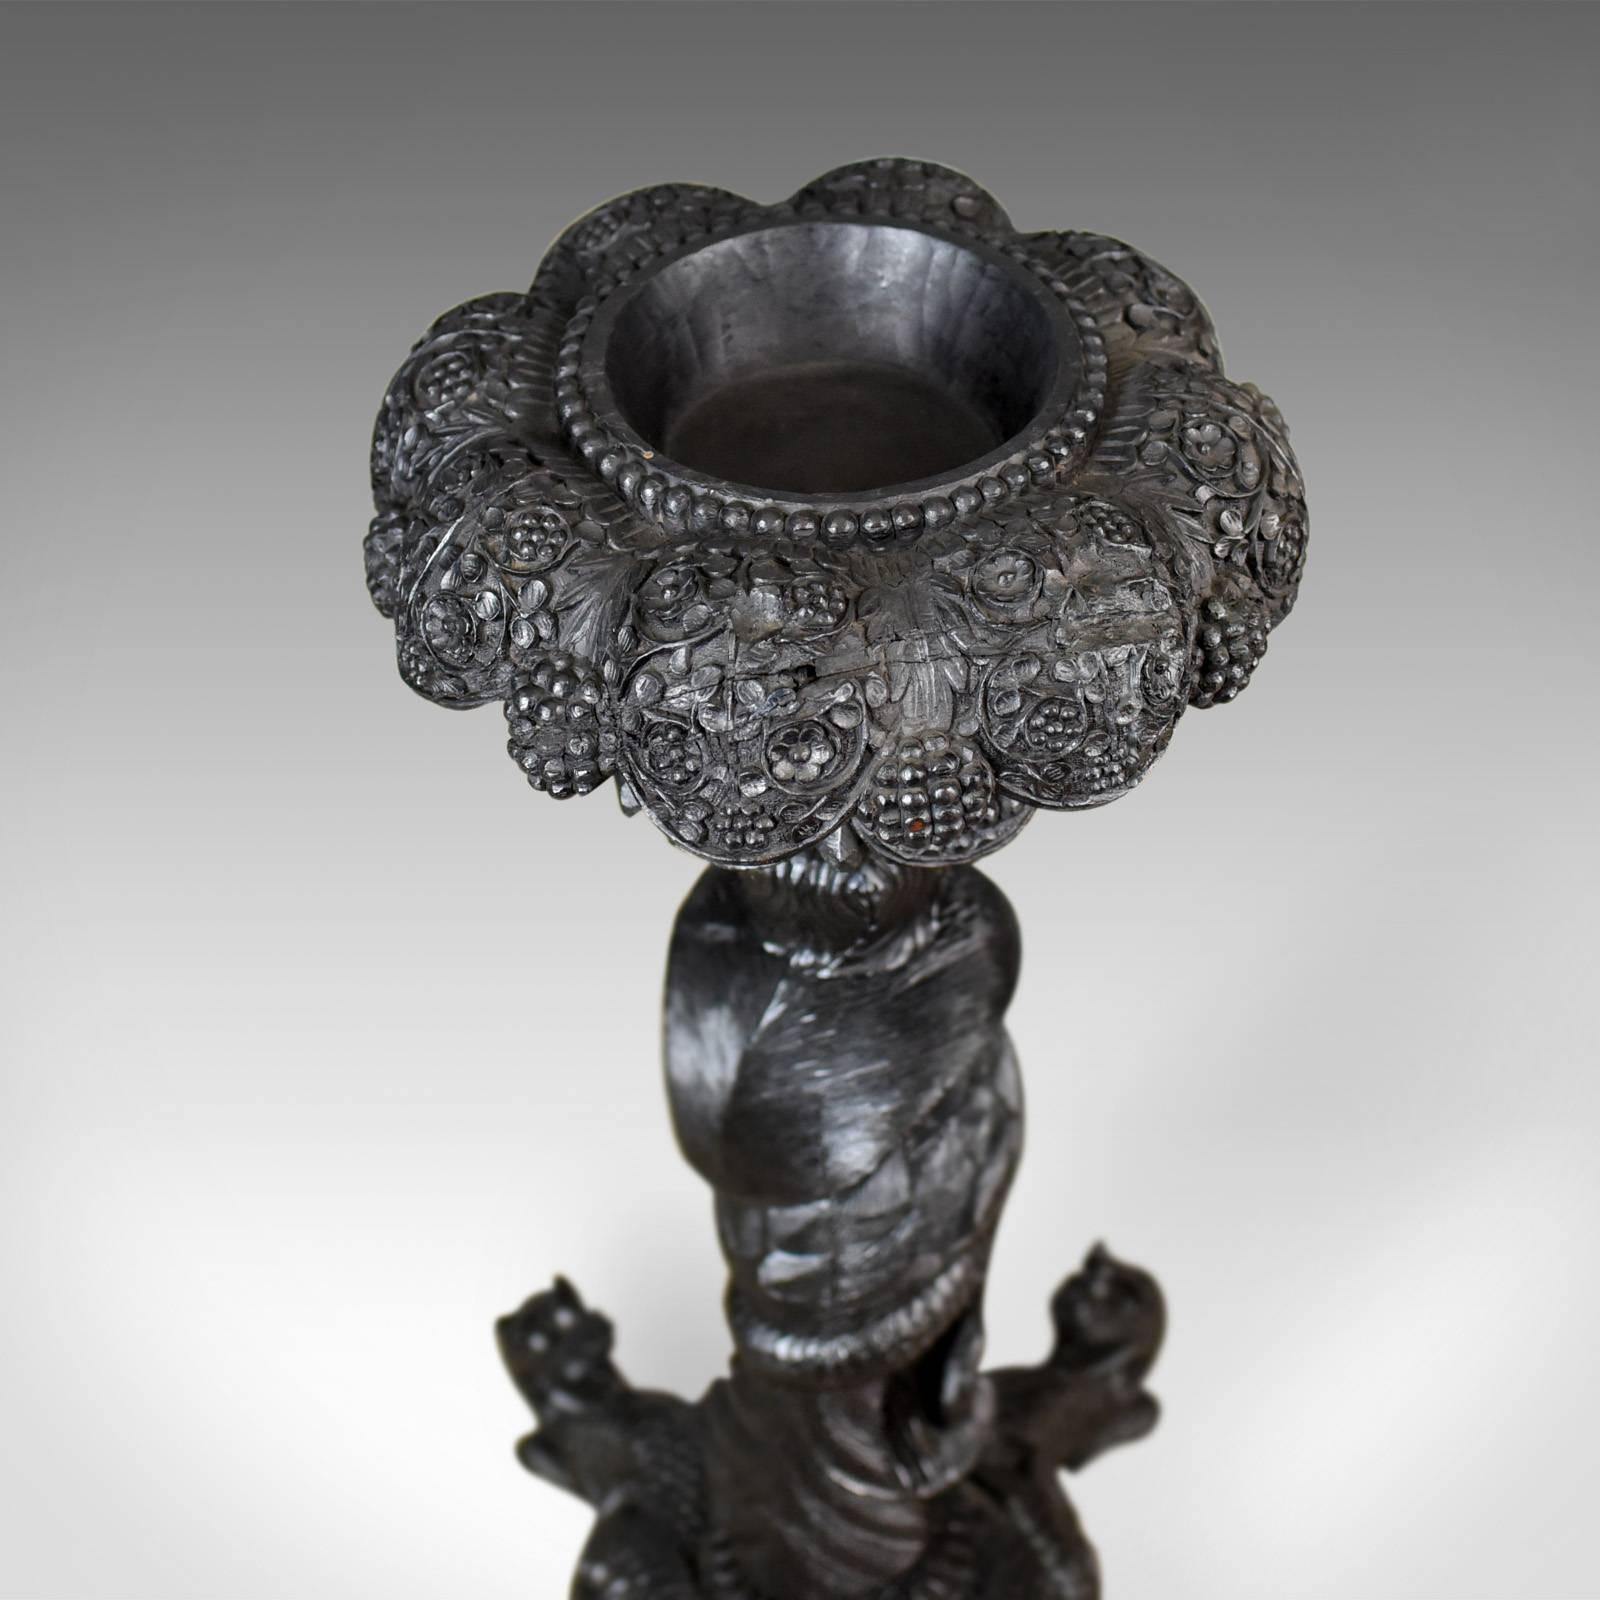 Chinese Export Antique Jardiniere Plant Stand, Carved Asian Torchere, circa 1880